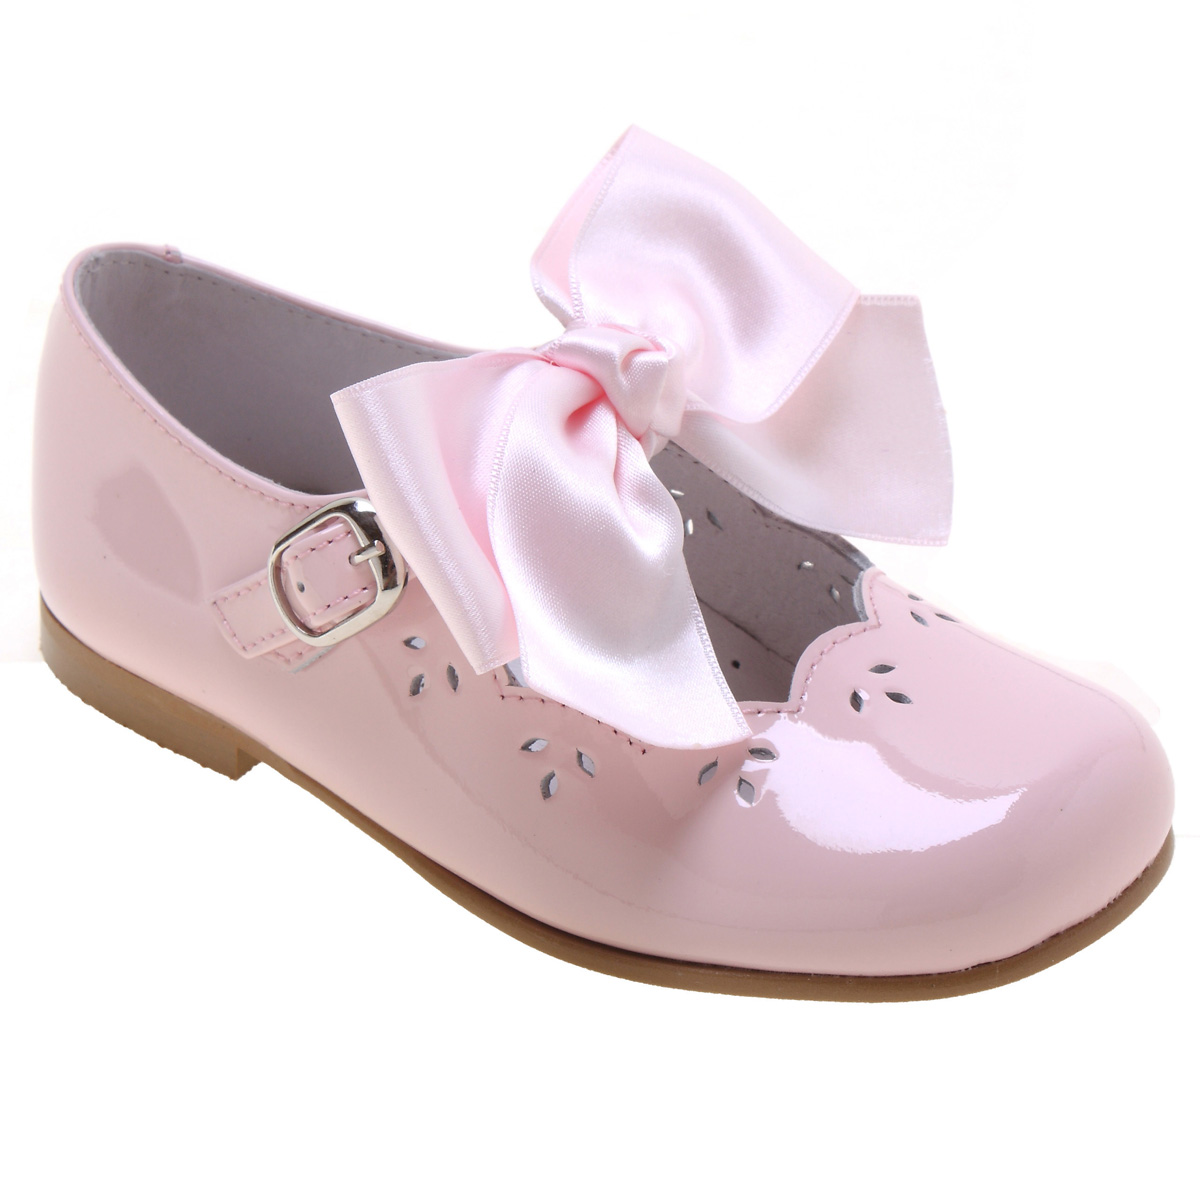 Girls Pink Patent Mary Jane Shoes Made 